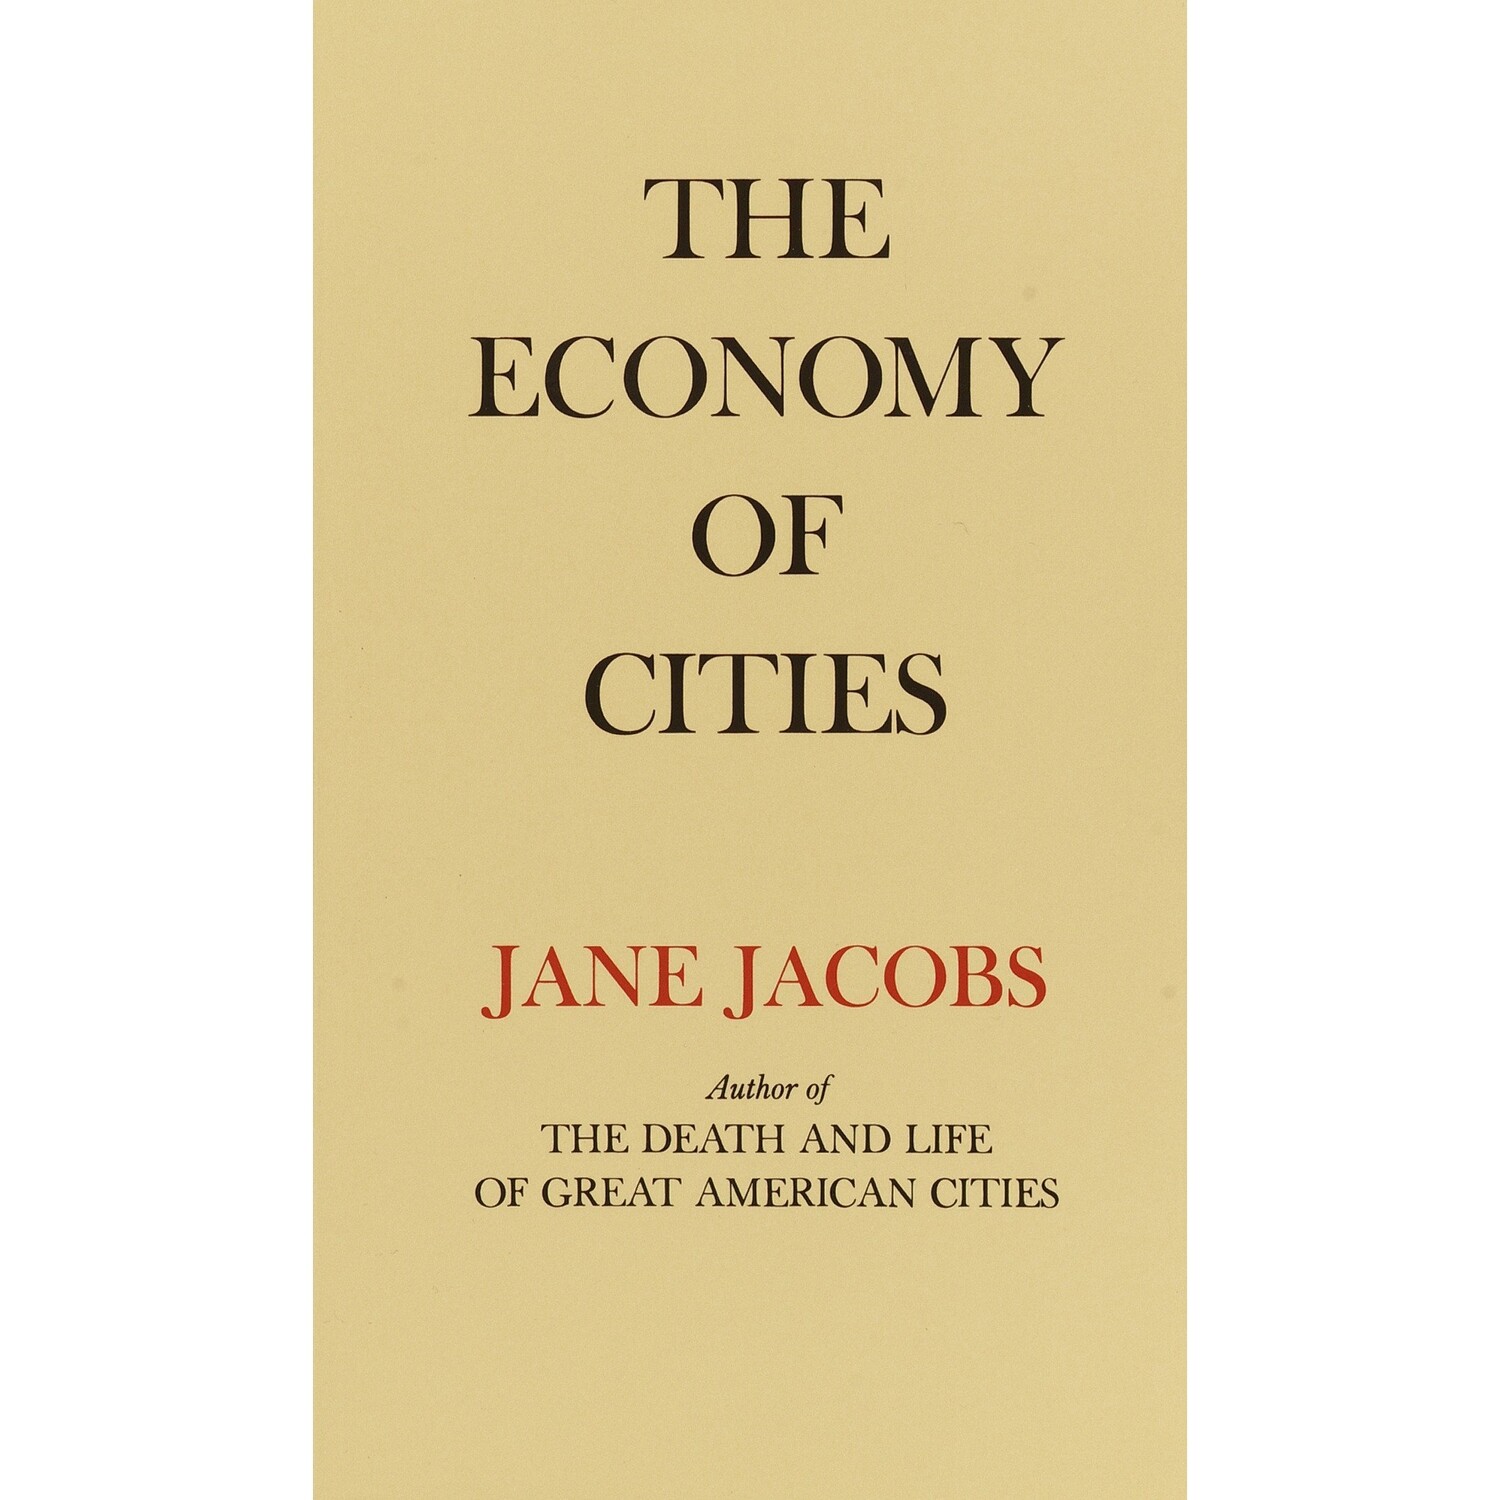 "The Economy of Cities" by Jane Jacobs